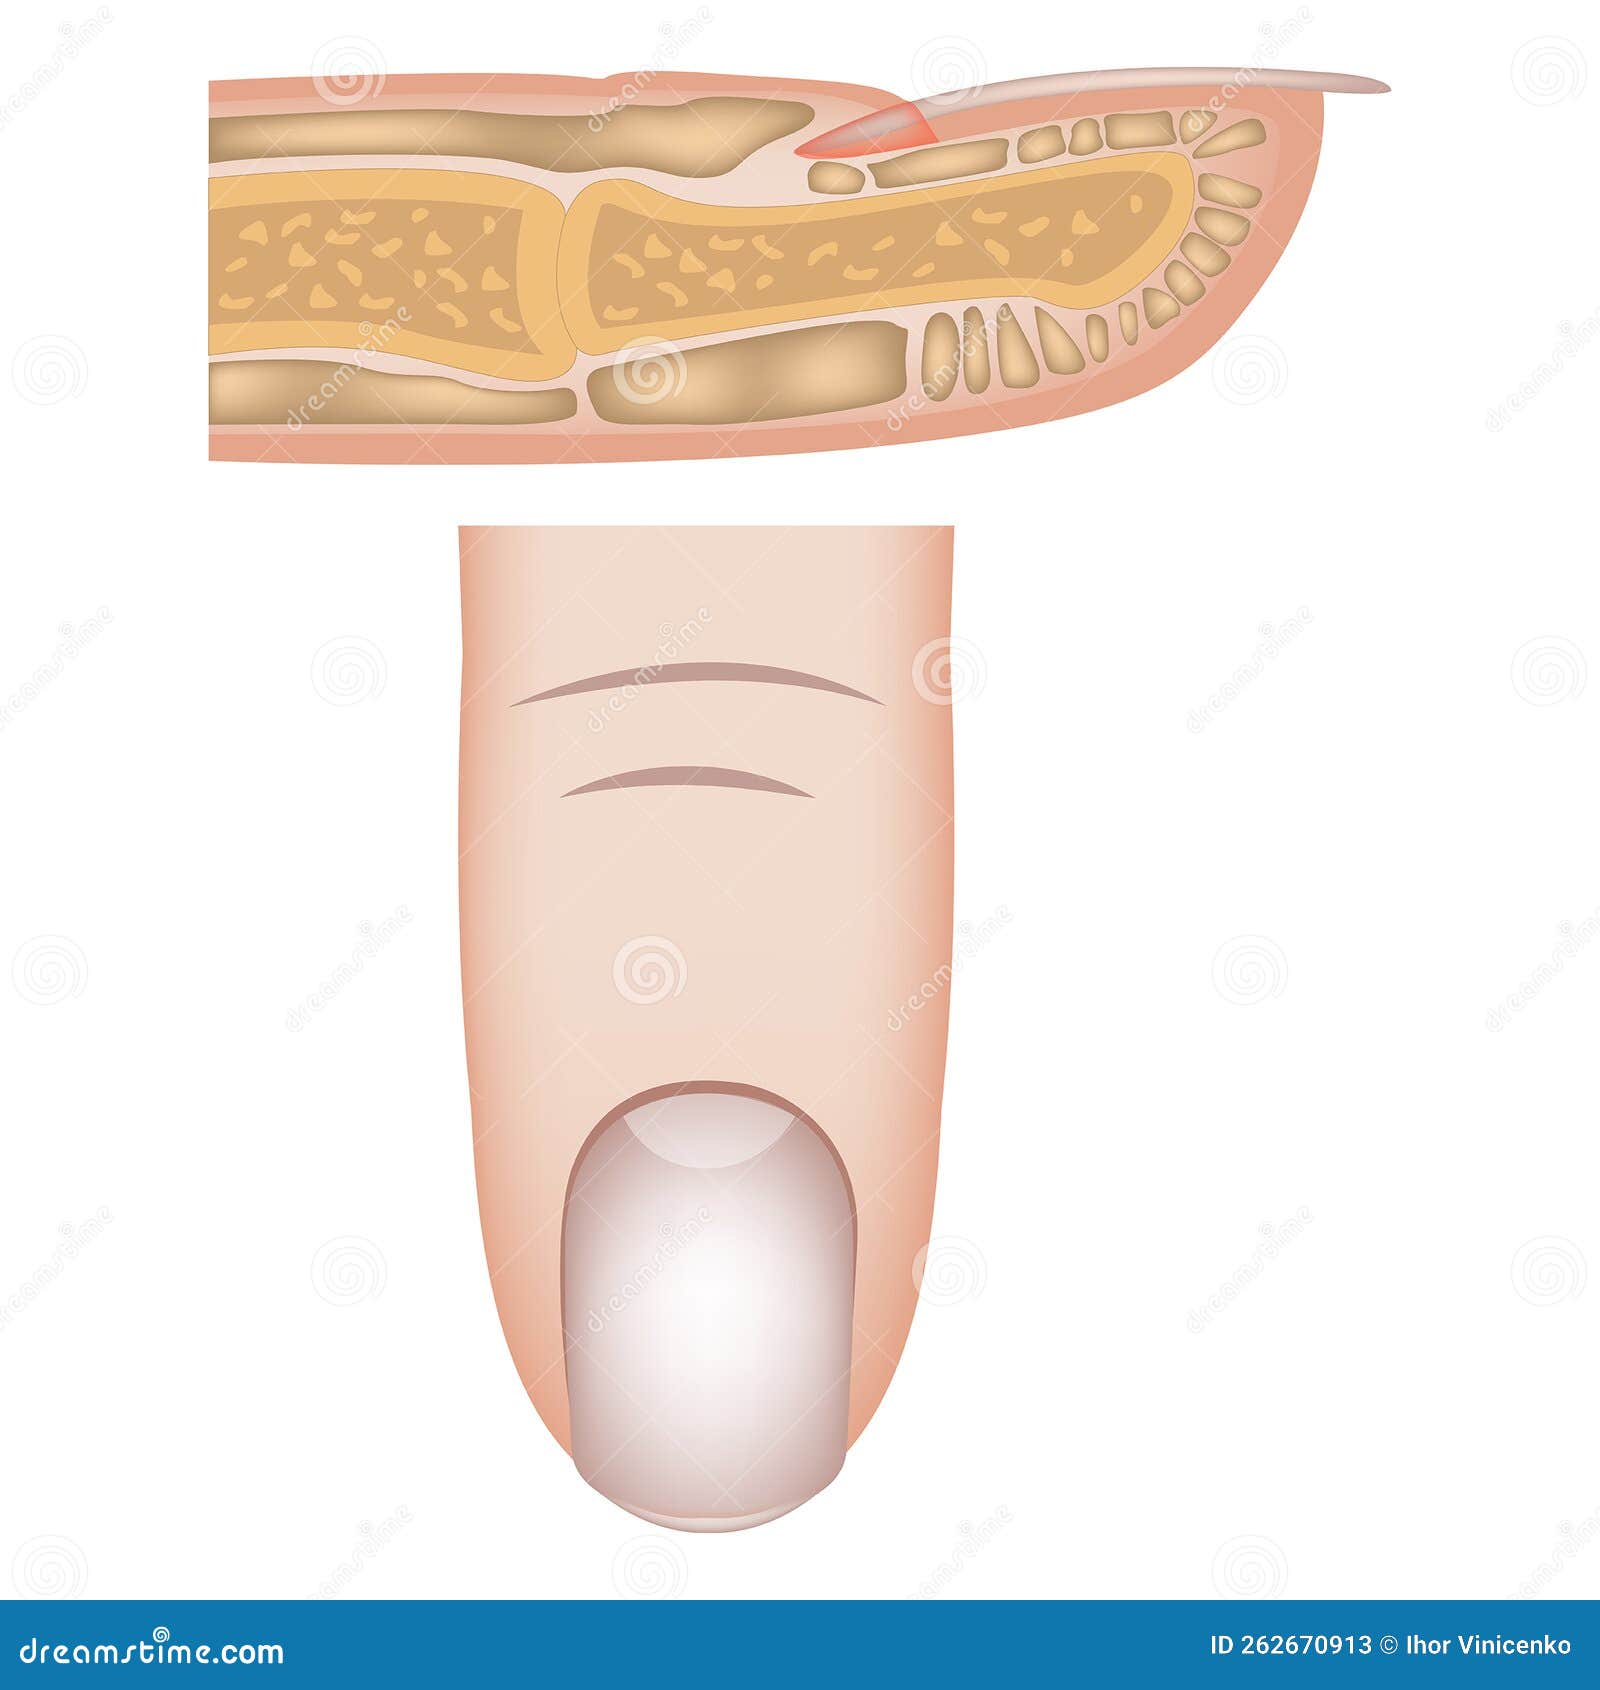 Nail Anatomy and Physiology Quiz: Test Your Knowledge of the Nail Unit